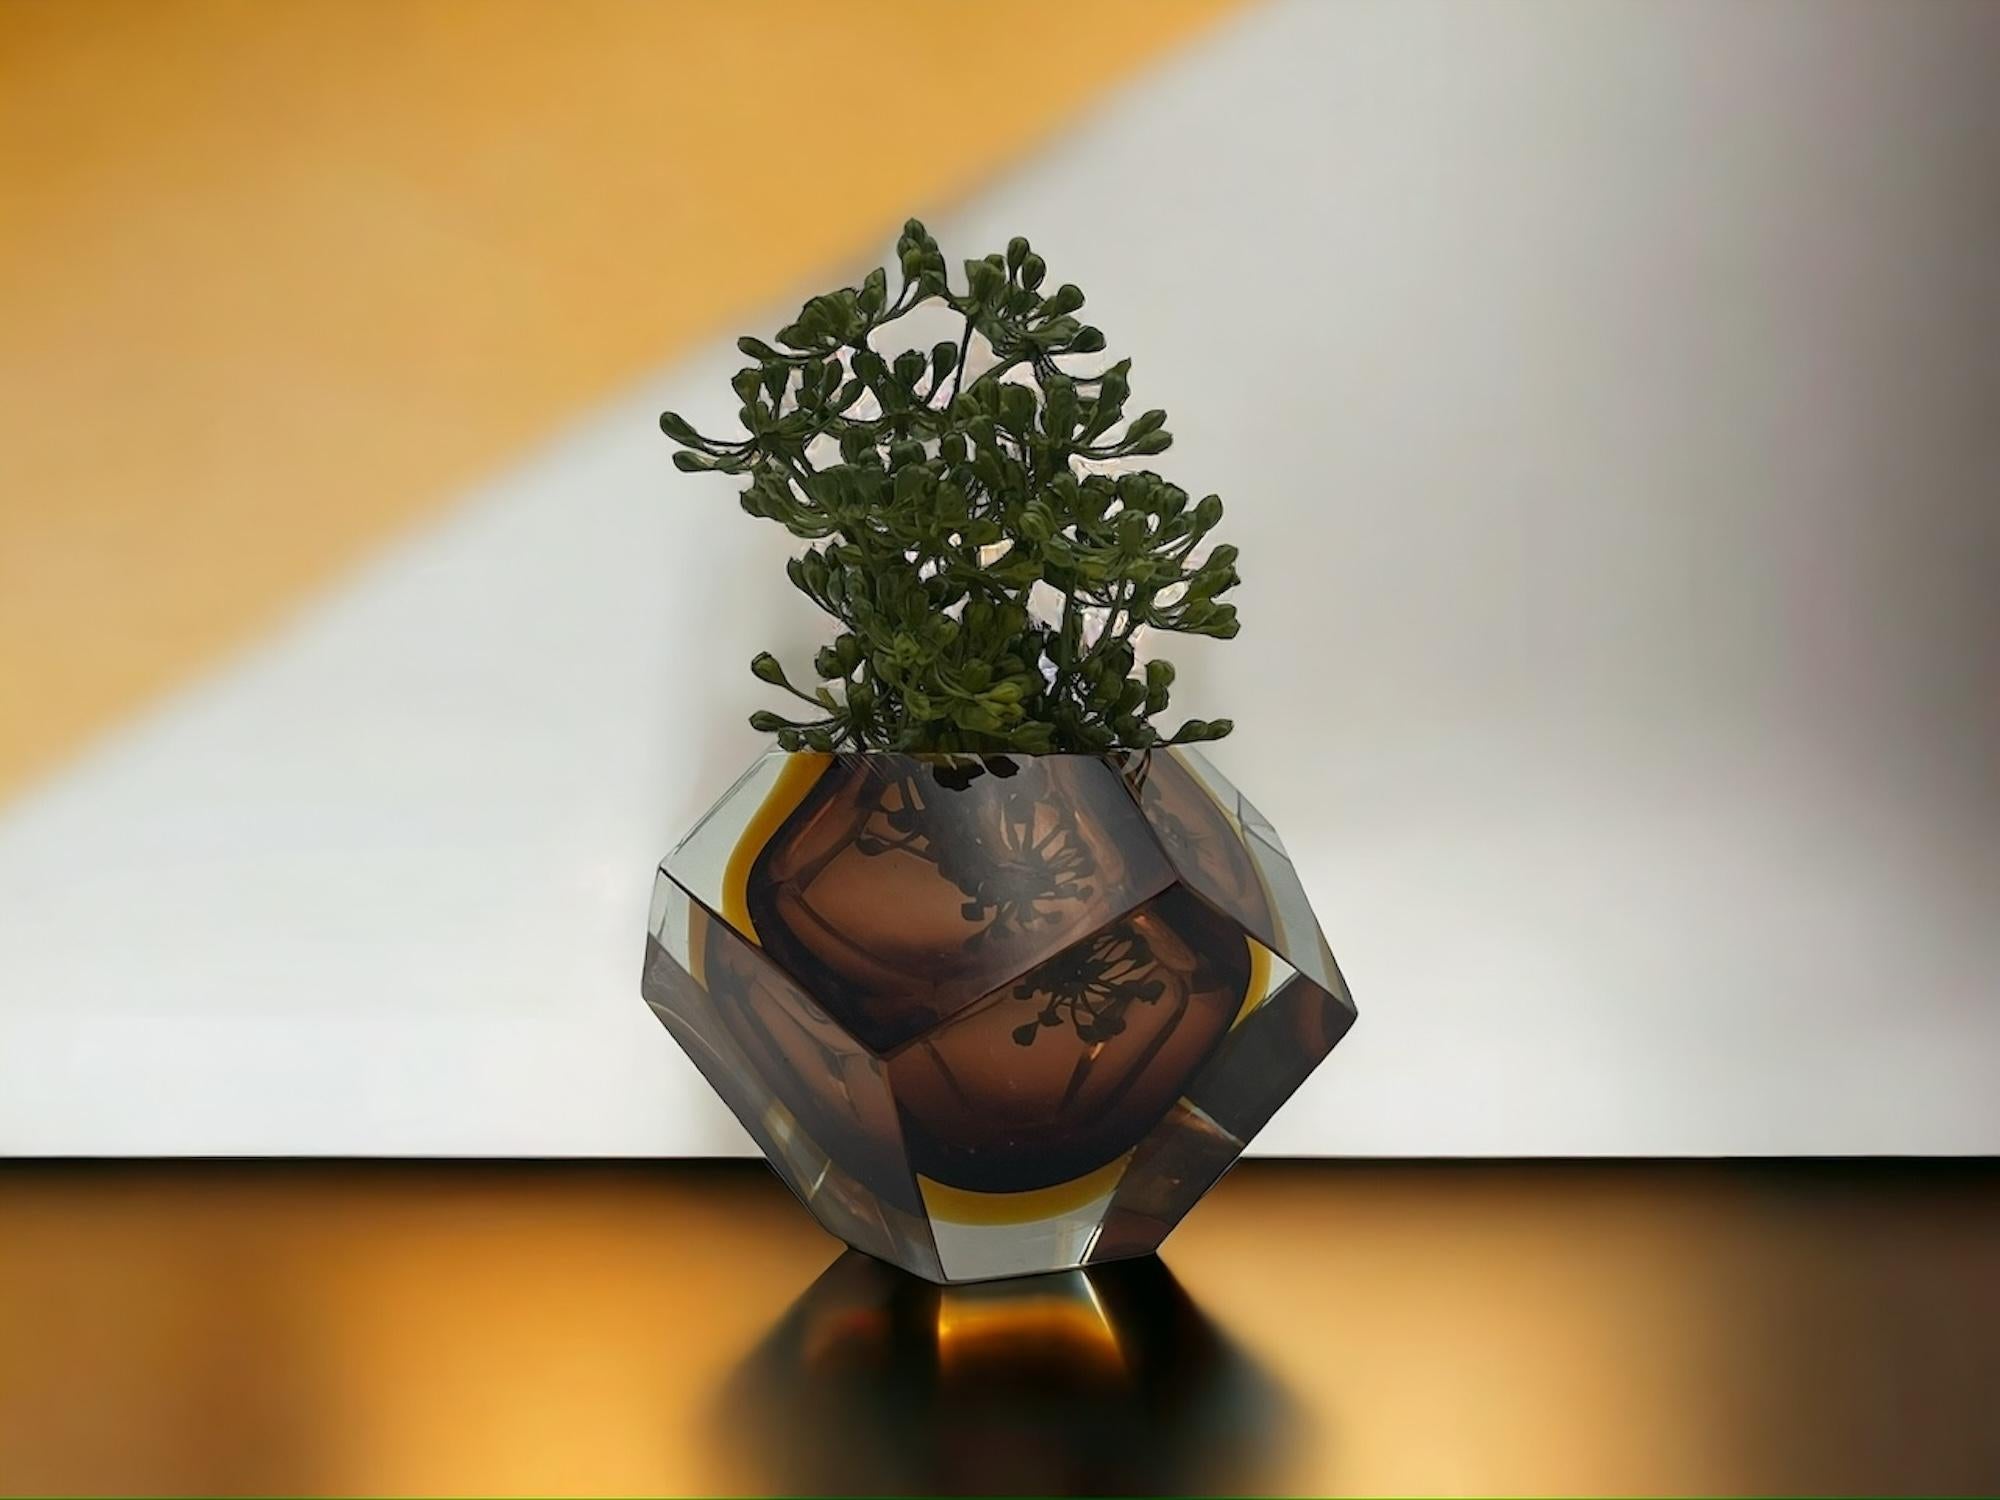 Lovely sculptural vase made of heavy ‘Sommerso’ Murano glass with the inimitable style of Fabio Poli for Seguso.

These refined vase features warm abd brilliant hues, with hazelnut brown and gold shades submerged into fume clear glass. The angular